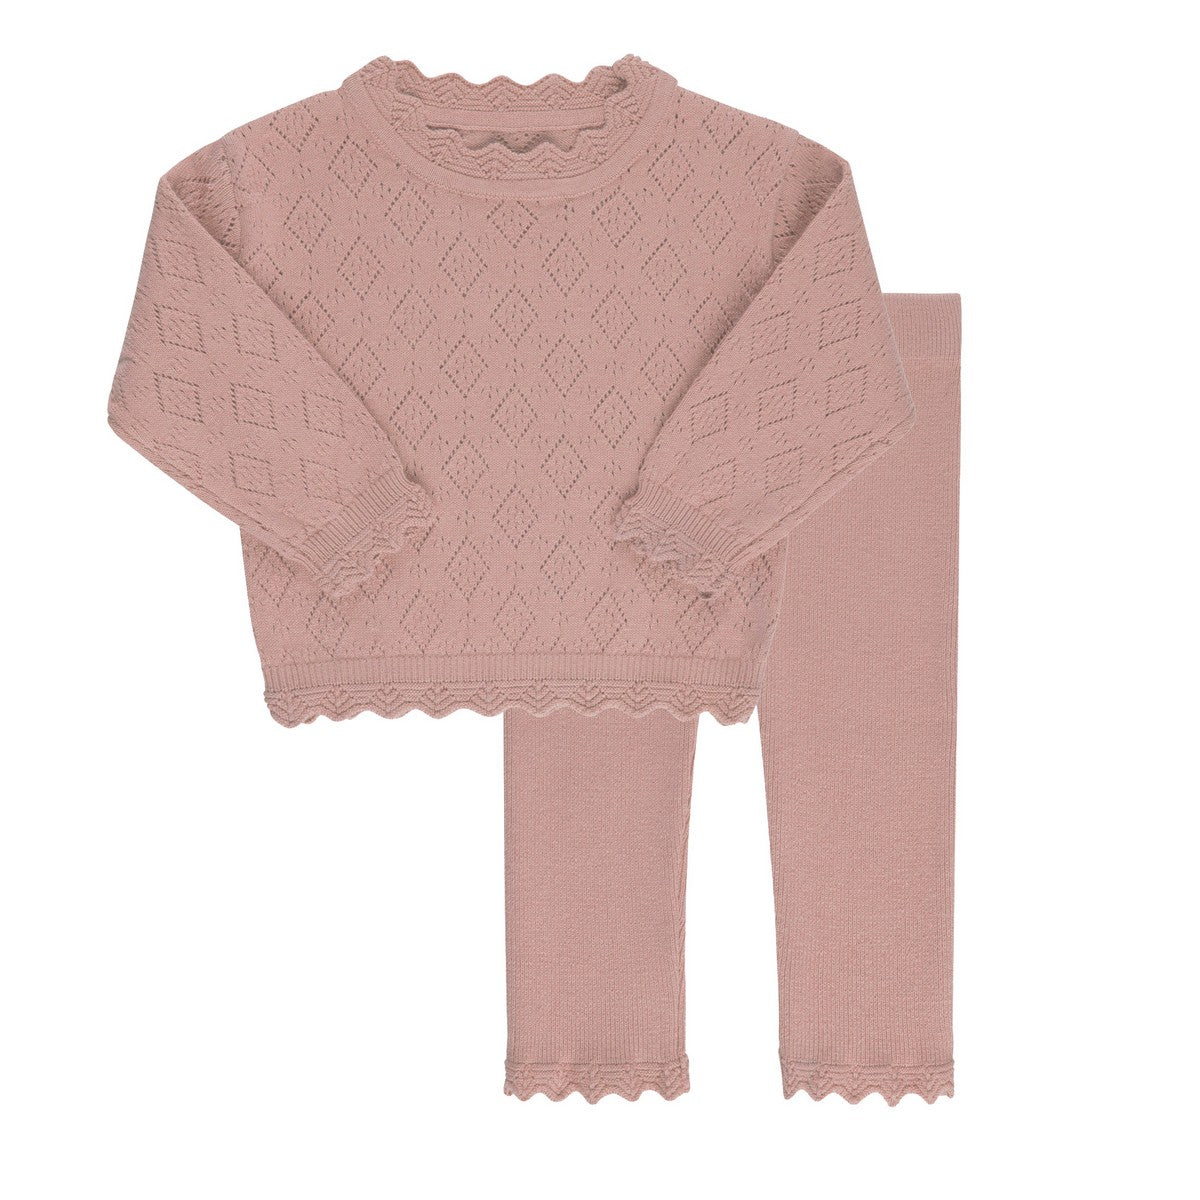 Ely's & Co Pink Pointelle Knit Set